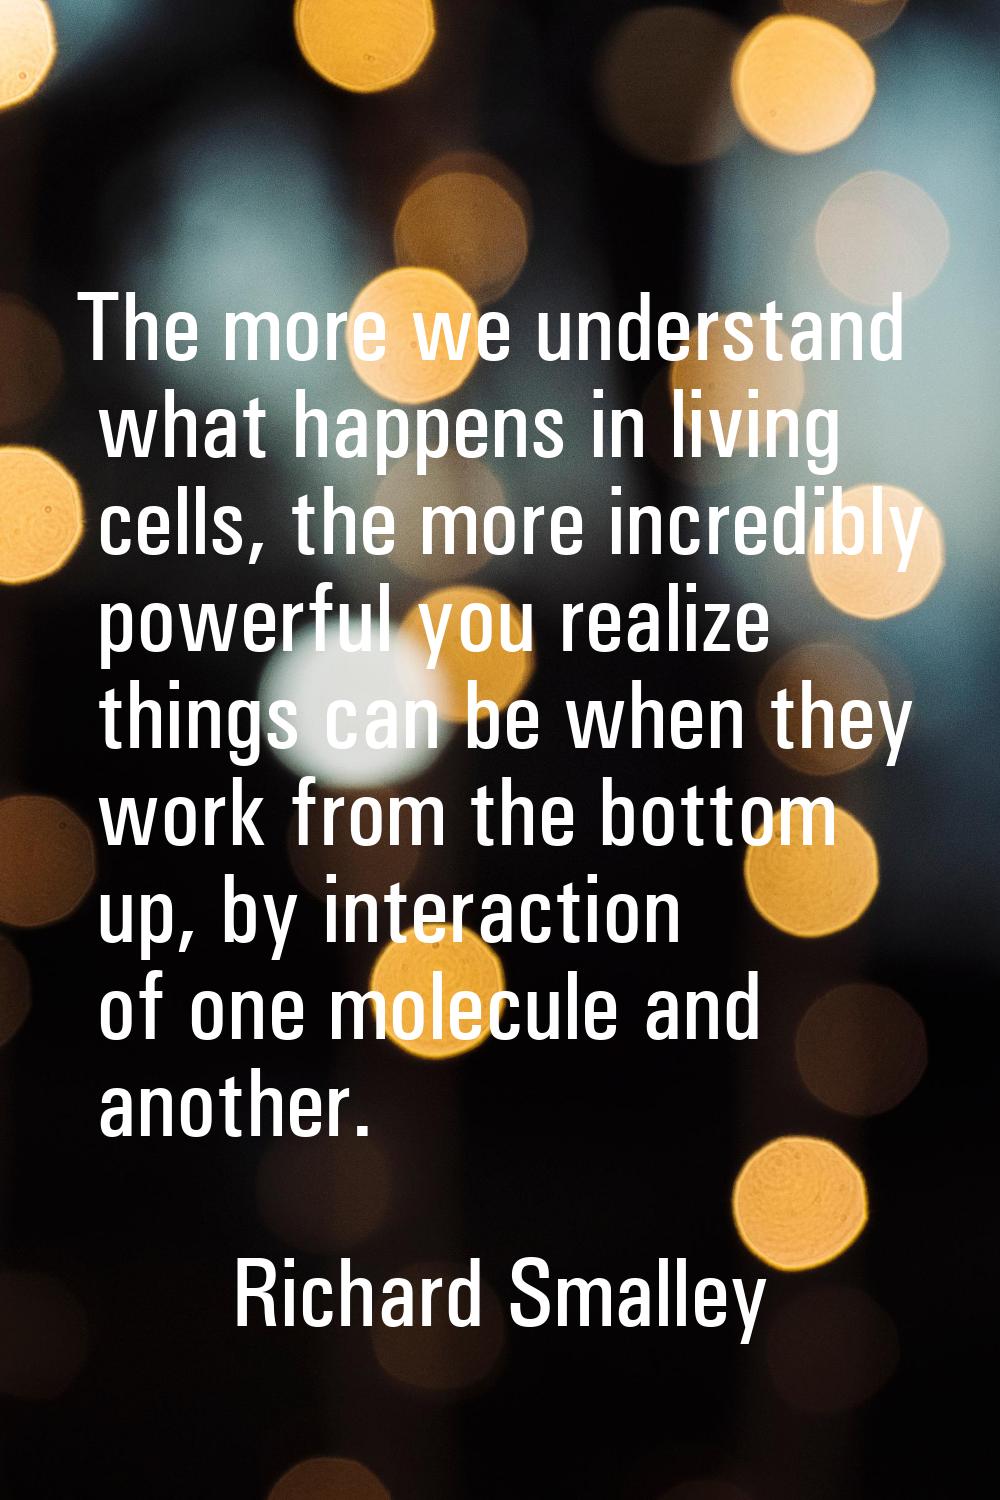 The more we understand what happens in living cells, the more incredibly powerful you realize thing